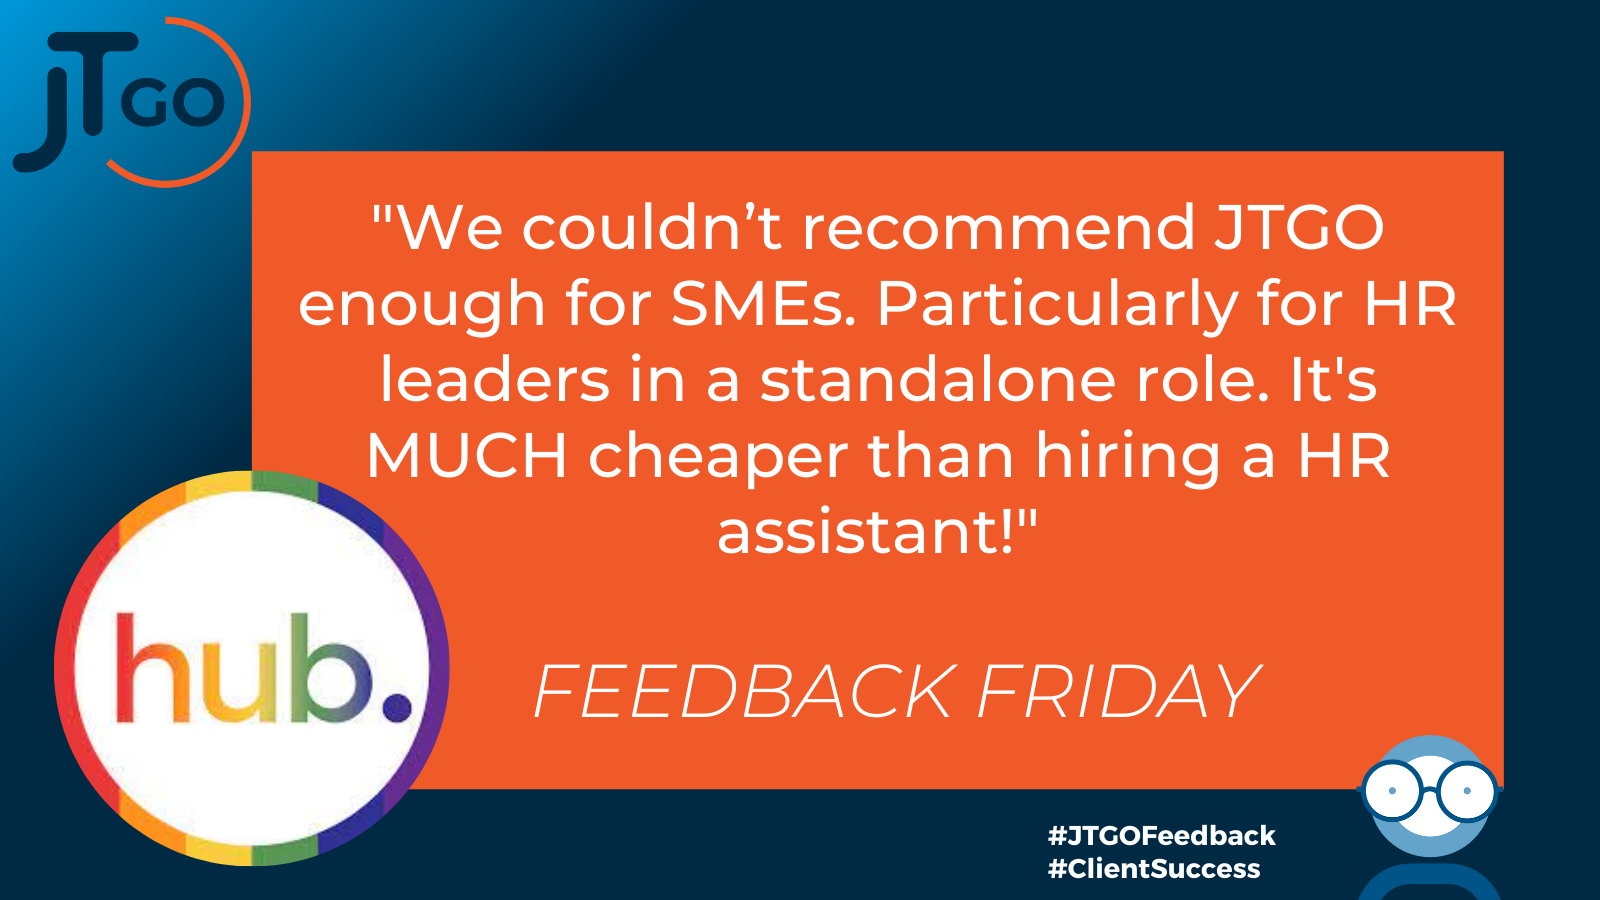 "We couldn't recommend JTGO enough for SMEs. Particularly for HR leaders in a standalone role. It's MUCH cheaper than hiring a HR assistant!"